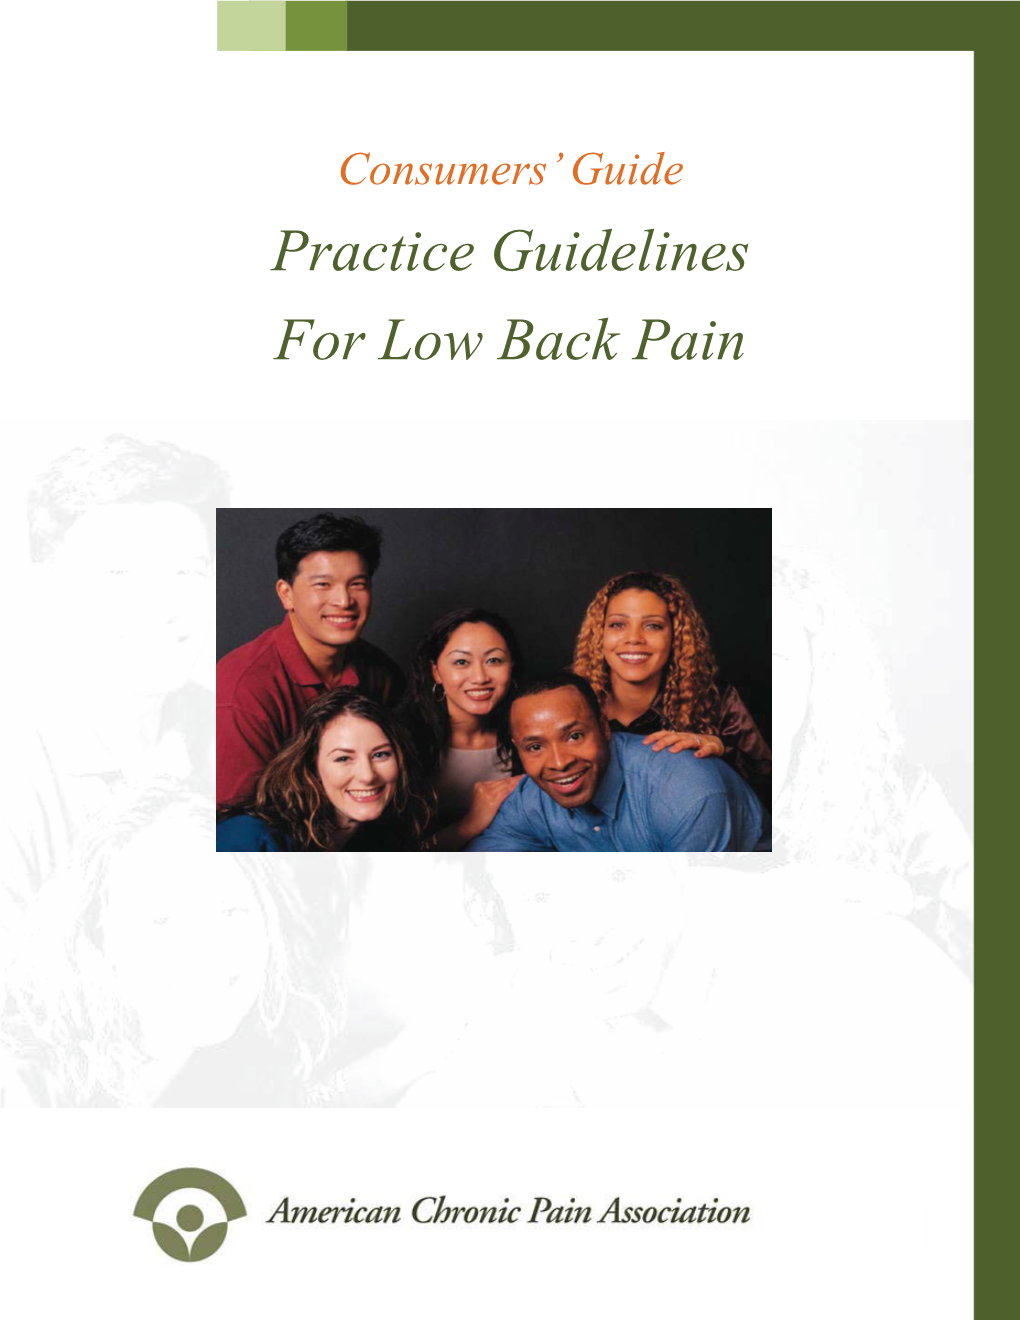 Practice Guidelines for Low Back Pain